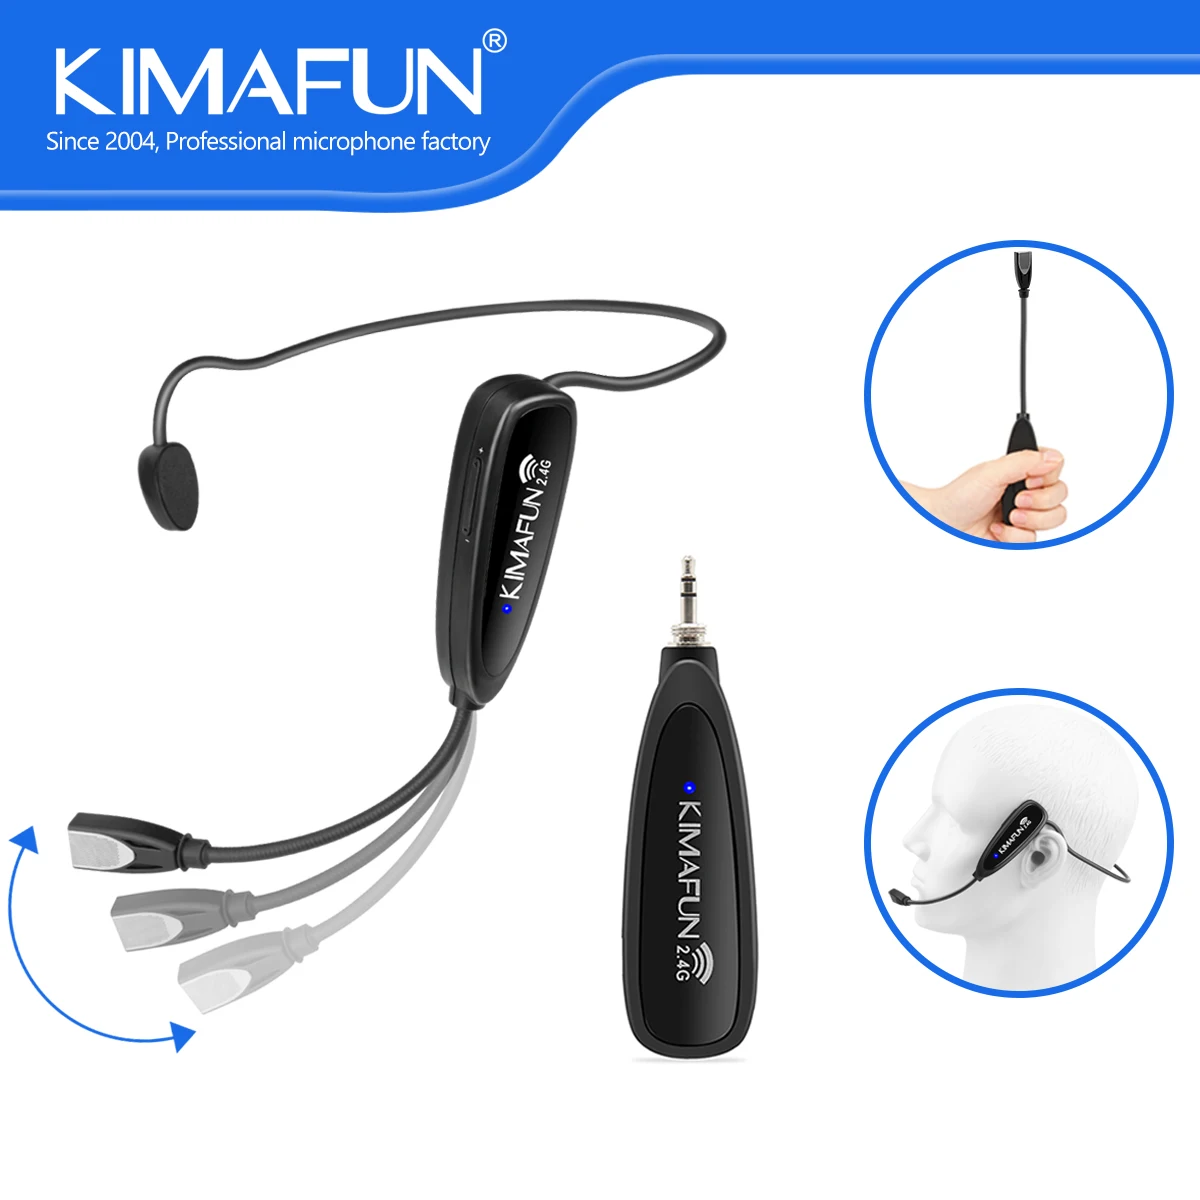 Enlarge Ship in 24 Hours KIMAFUN Wireless Headset Microphone Waterproof Video Record for DSLR Camera Smartphones Youtube Yoga Fittness